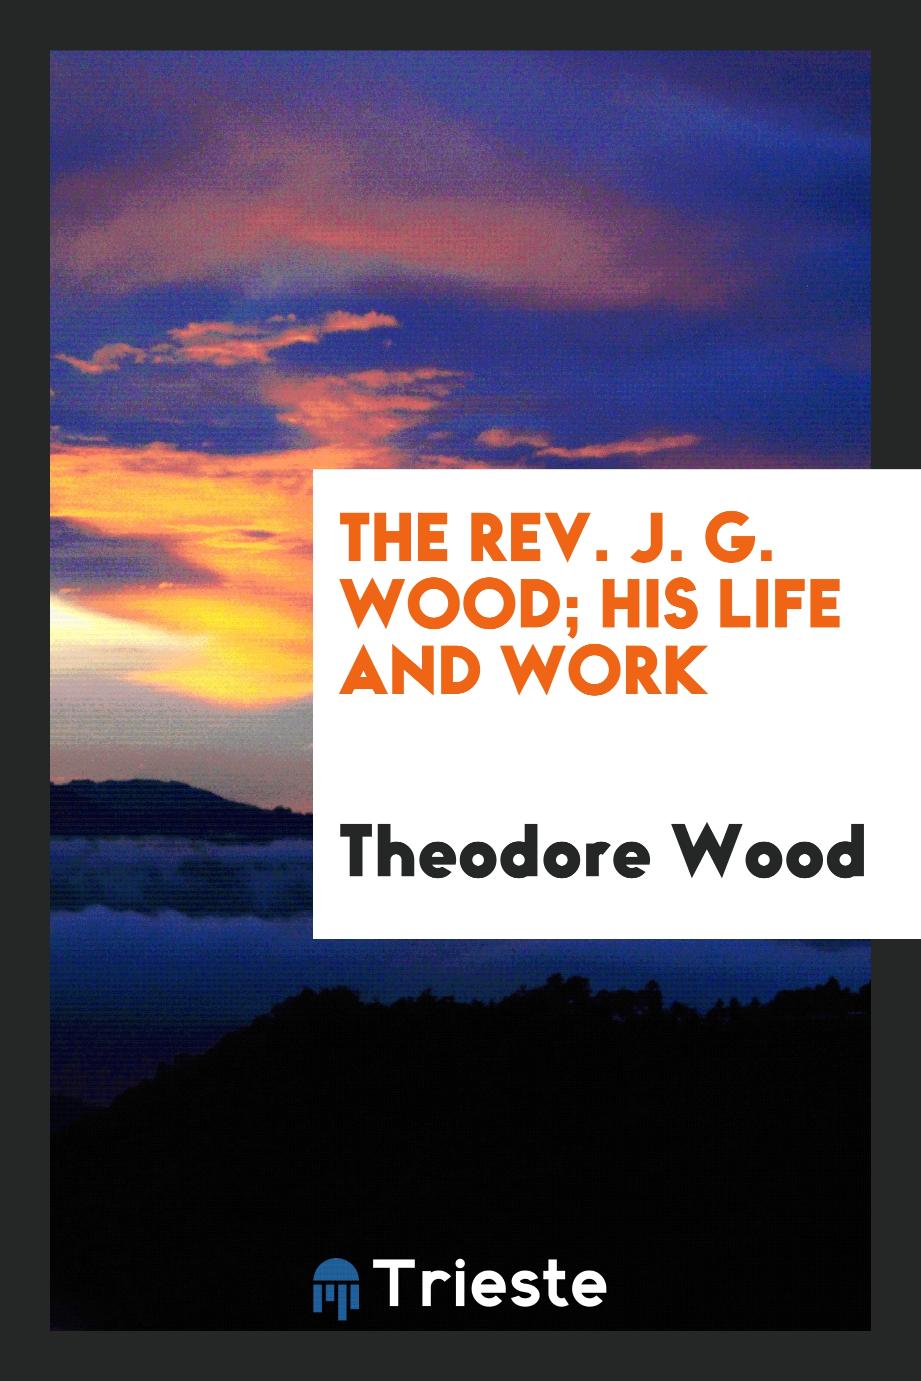 The Rev. J. G. Wood; his life and work